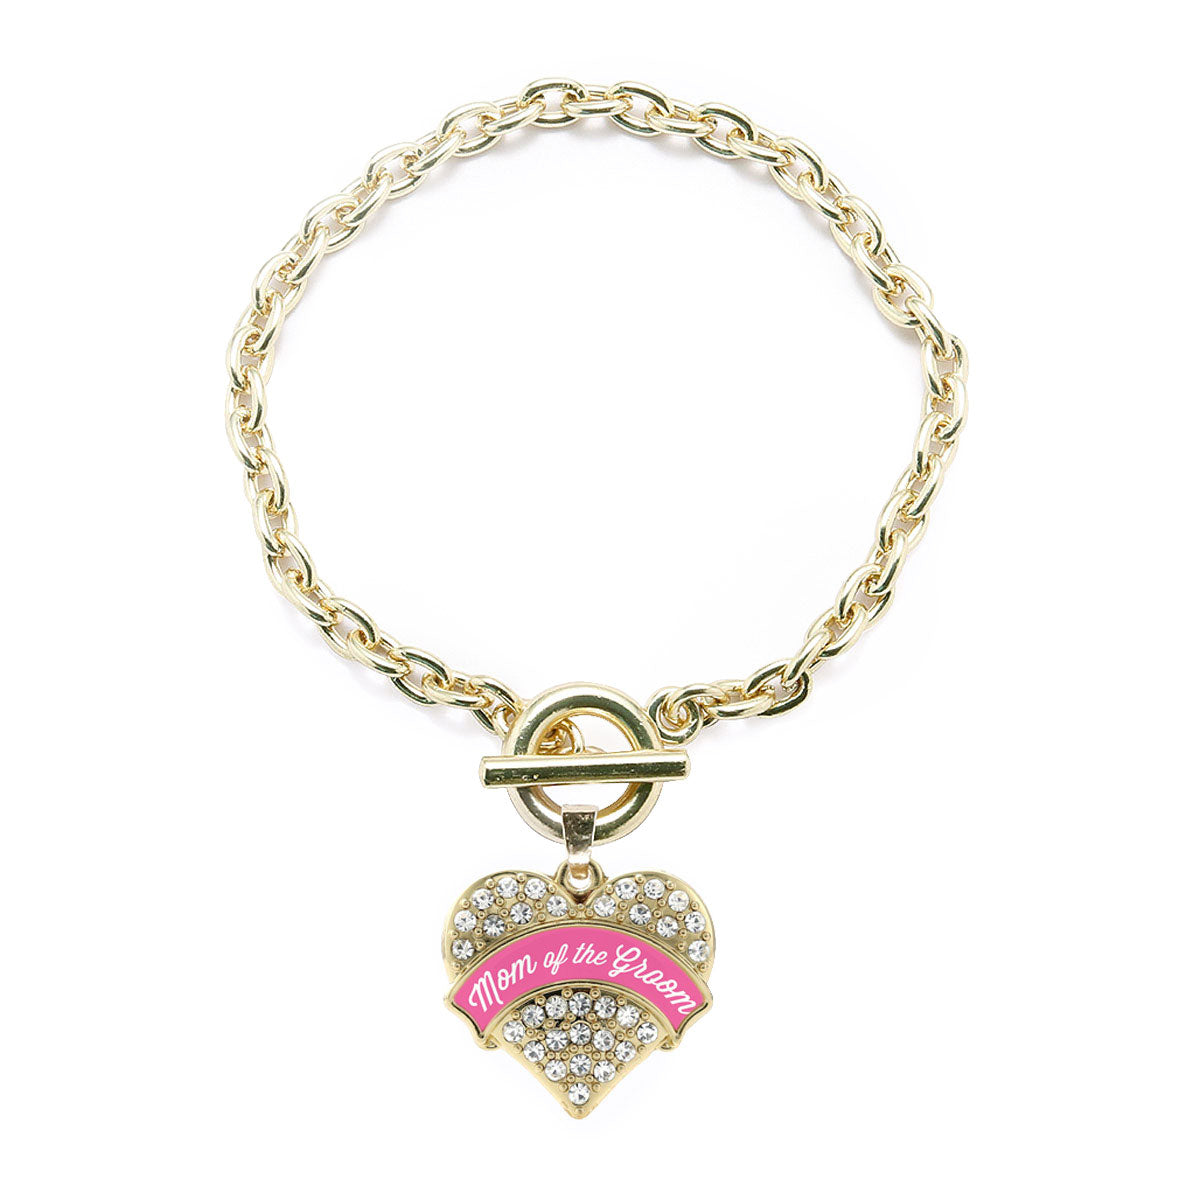 Gold Pink Mom of the Groom Pave Heart Charm Toggle Bracelet